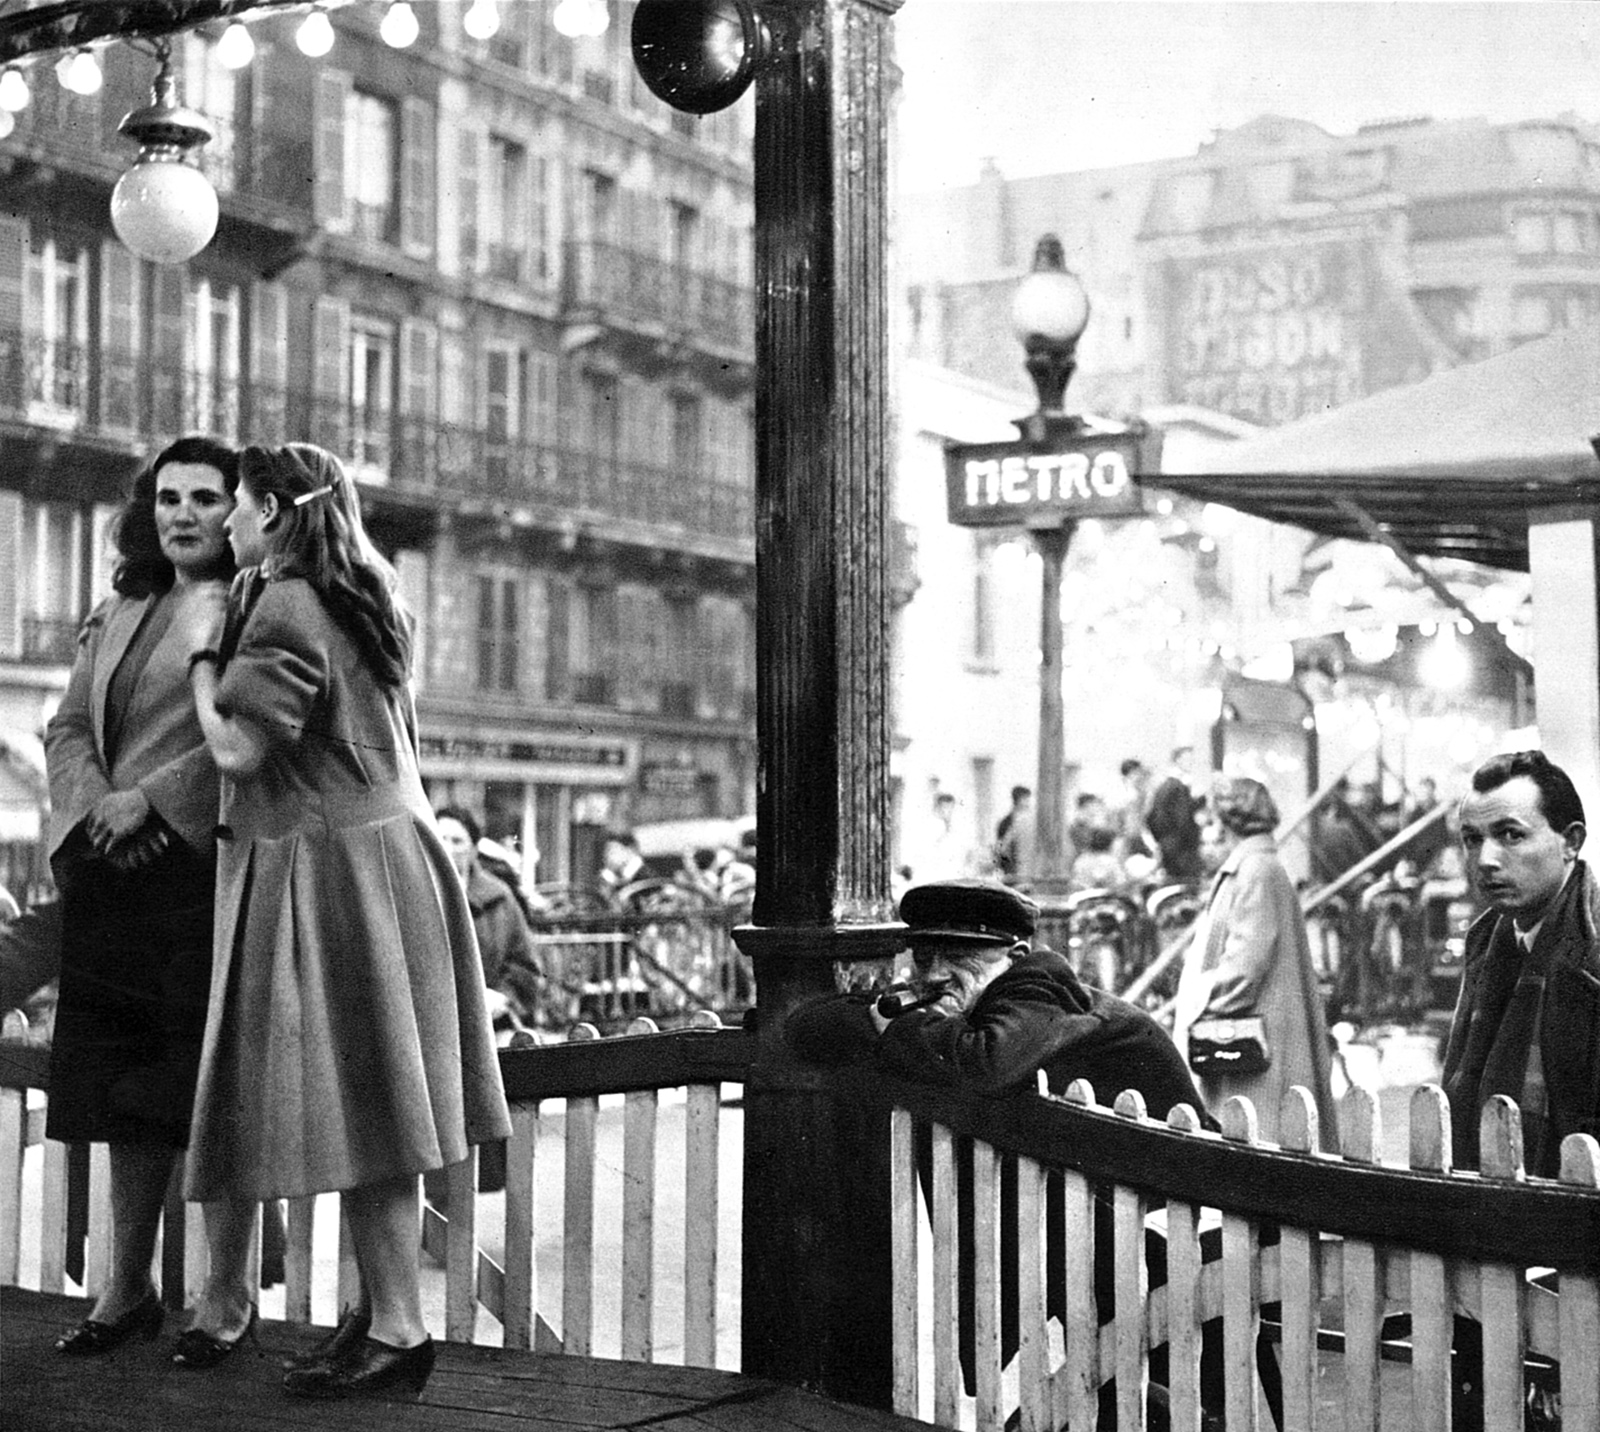 One of the dozens of photographs of Paris taken by Patrice Molinard for the 1954 edition of Paris Vagabond